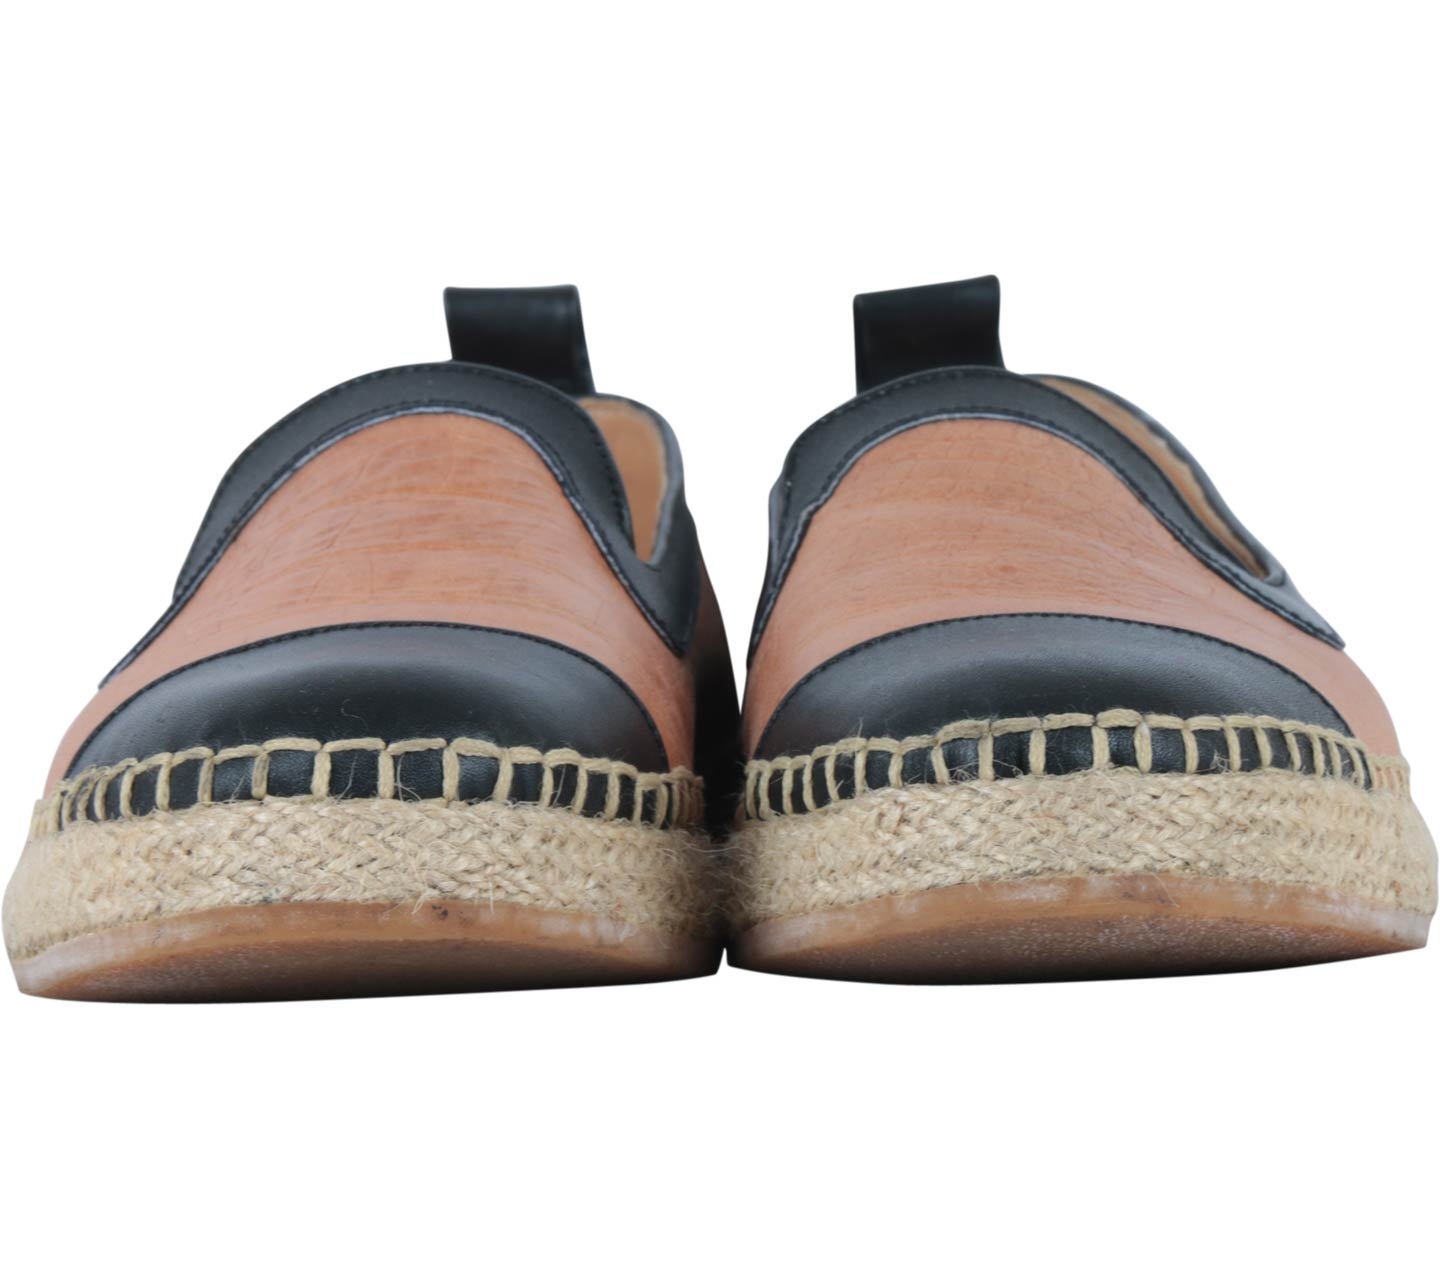 We Are Simplicite Brown And Black Leather Espadrilles Flats